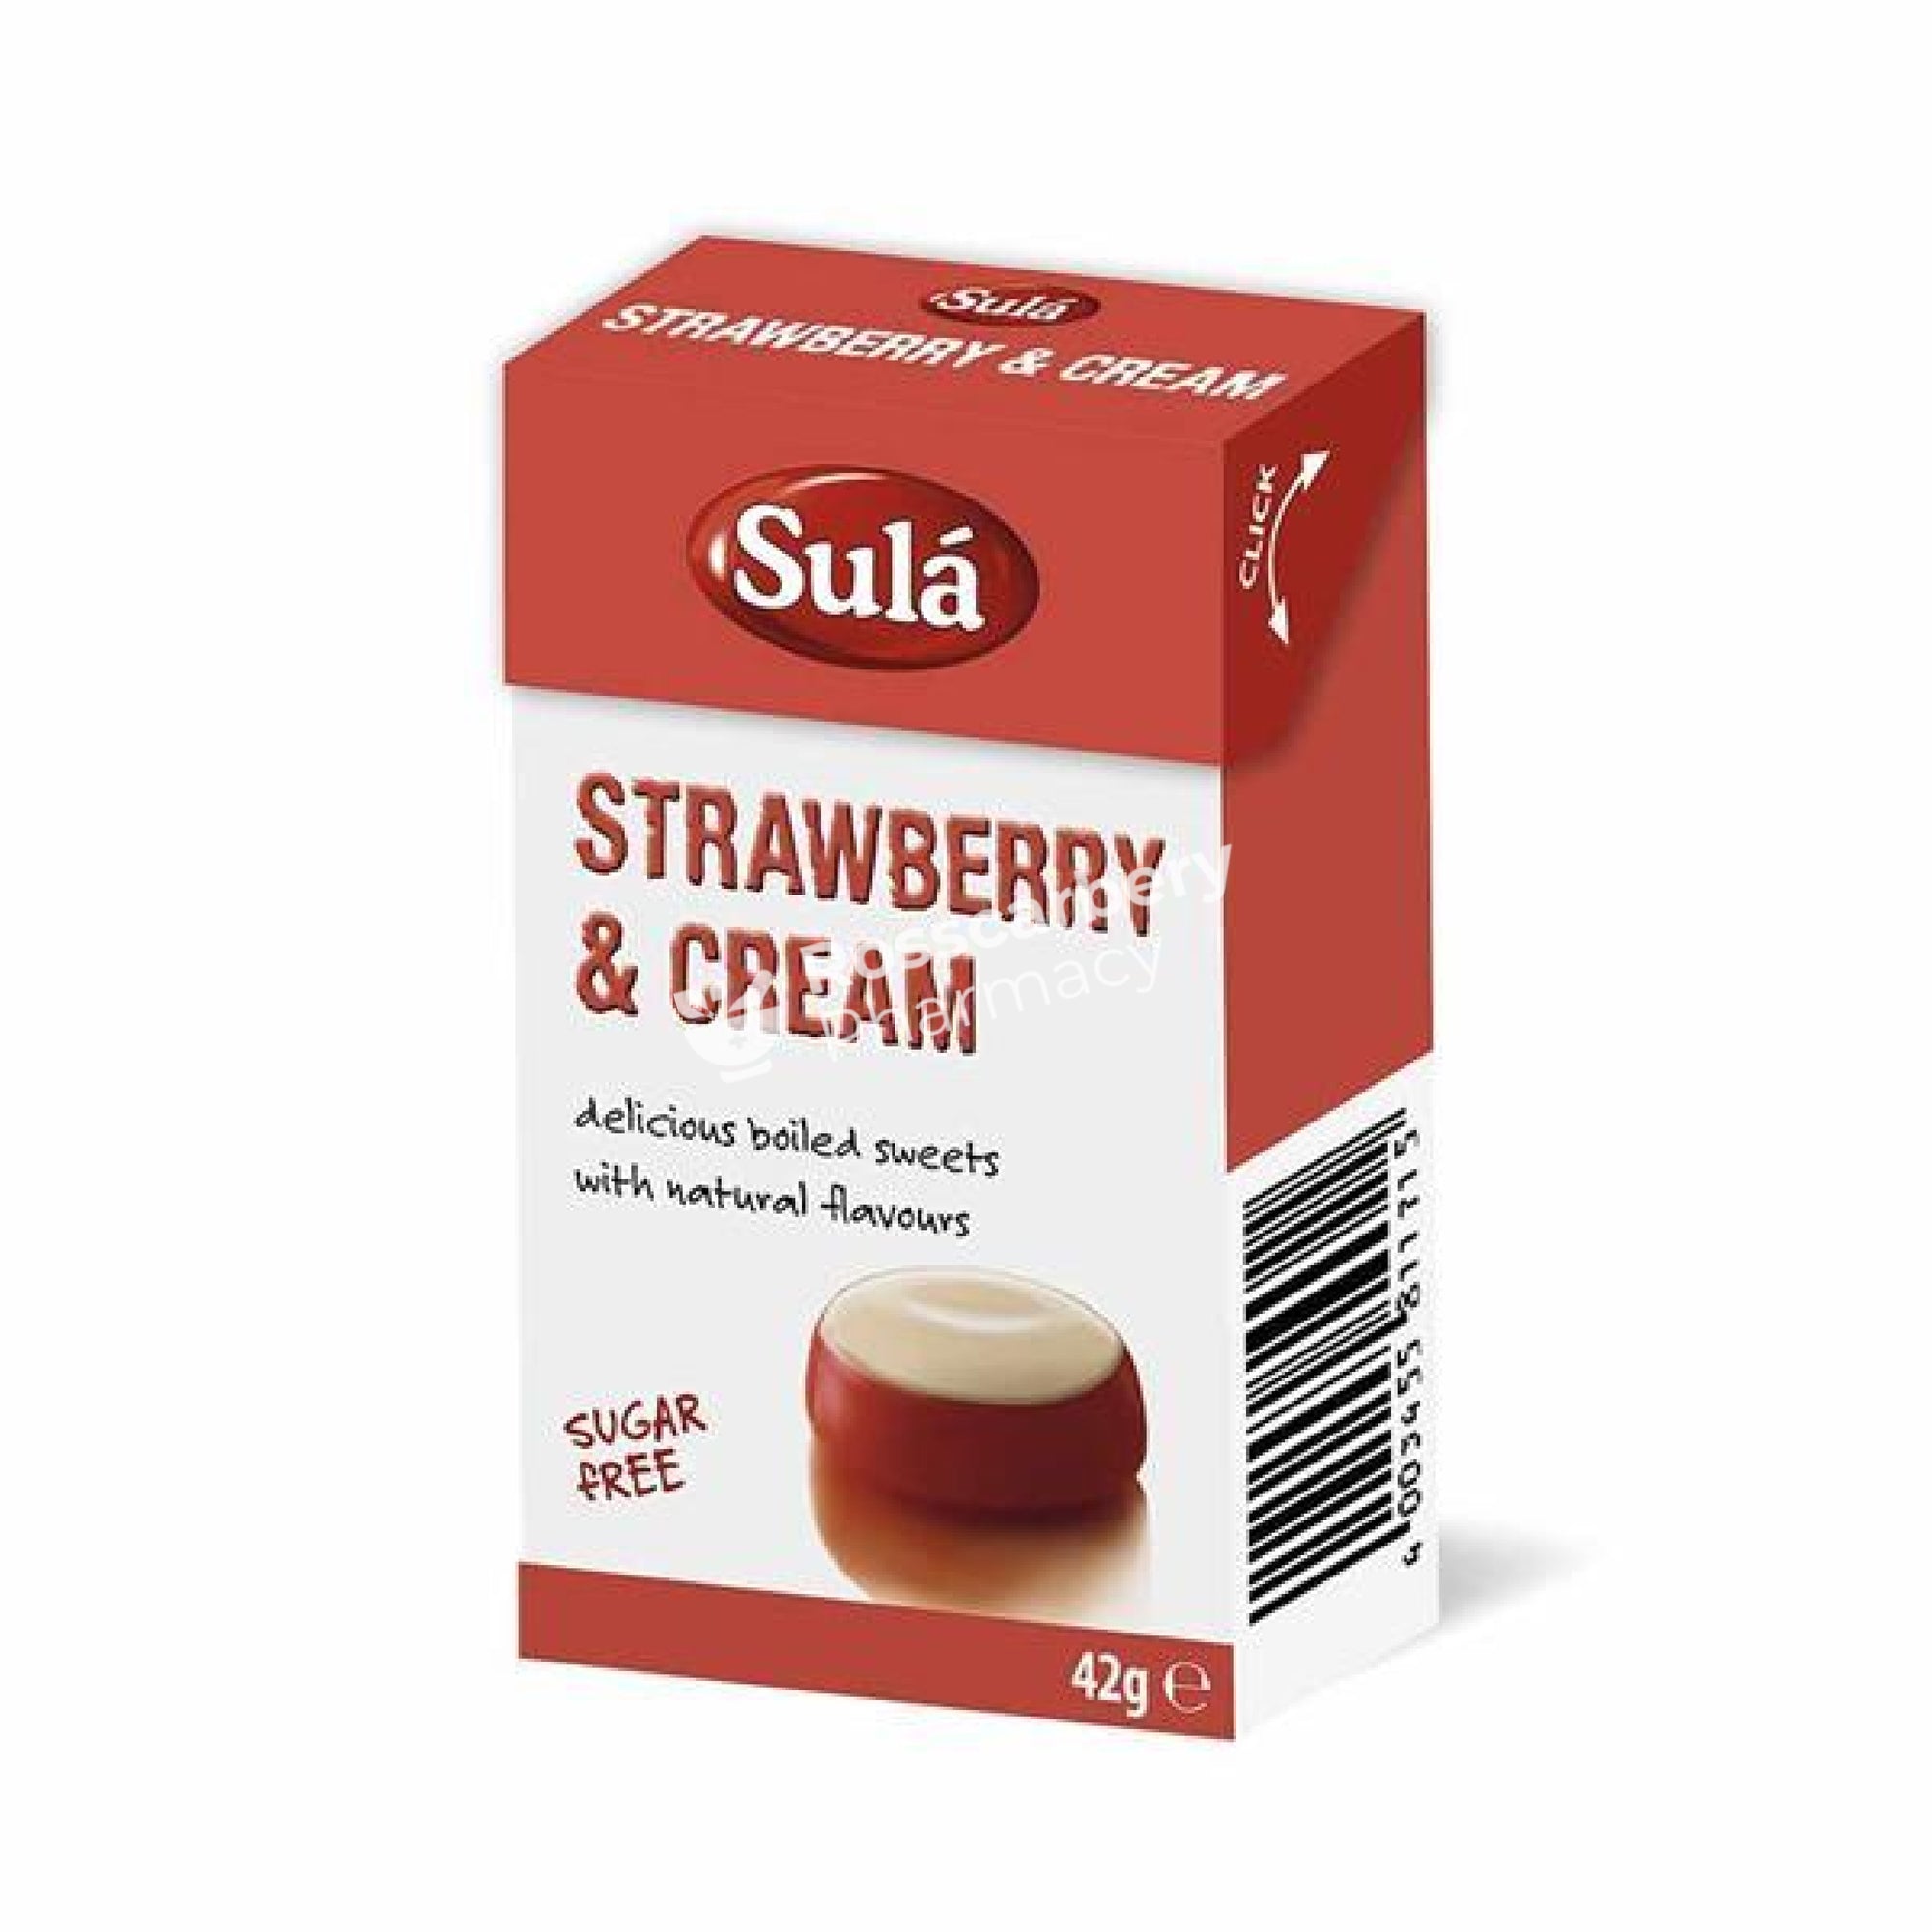 Sula - Strawberry & Cream Boiled Sweets Sugar Free Sweets/lozenges/pastilles